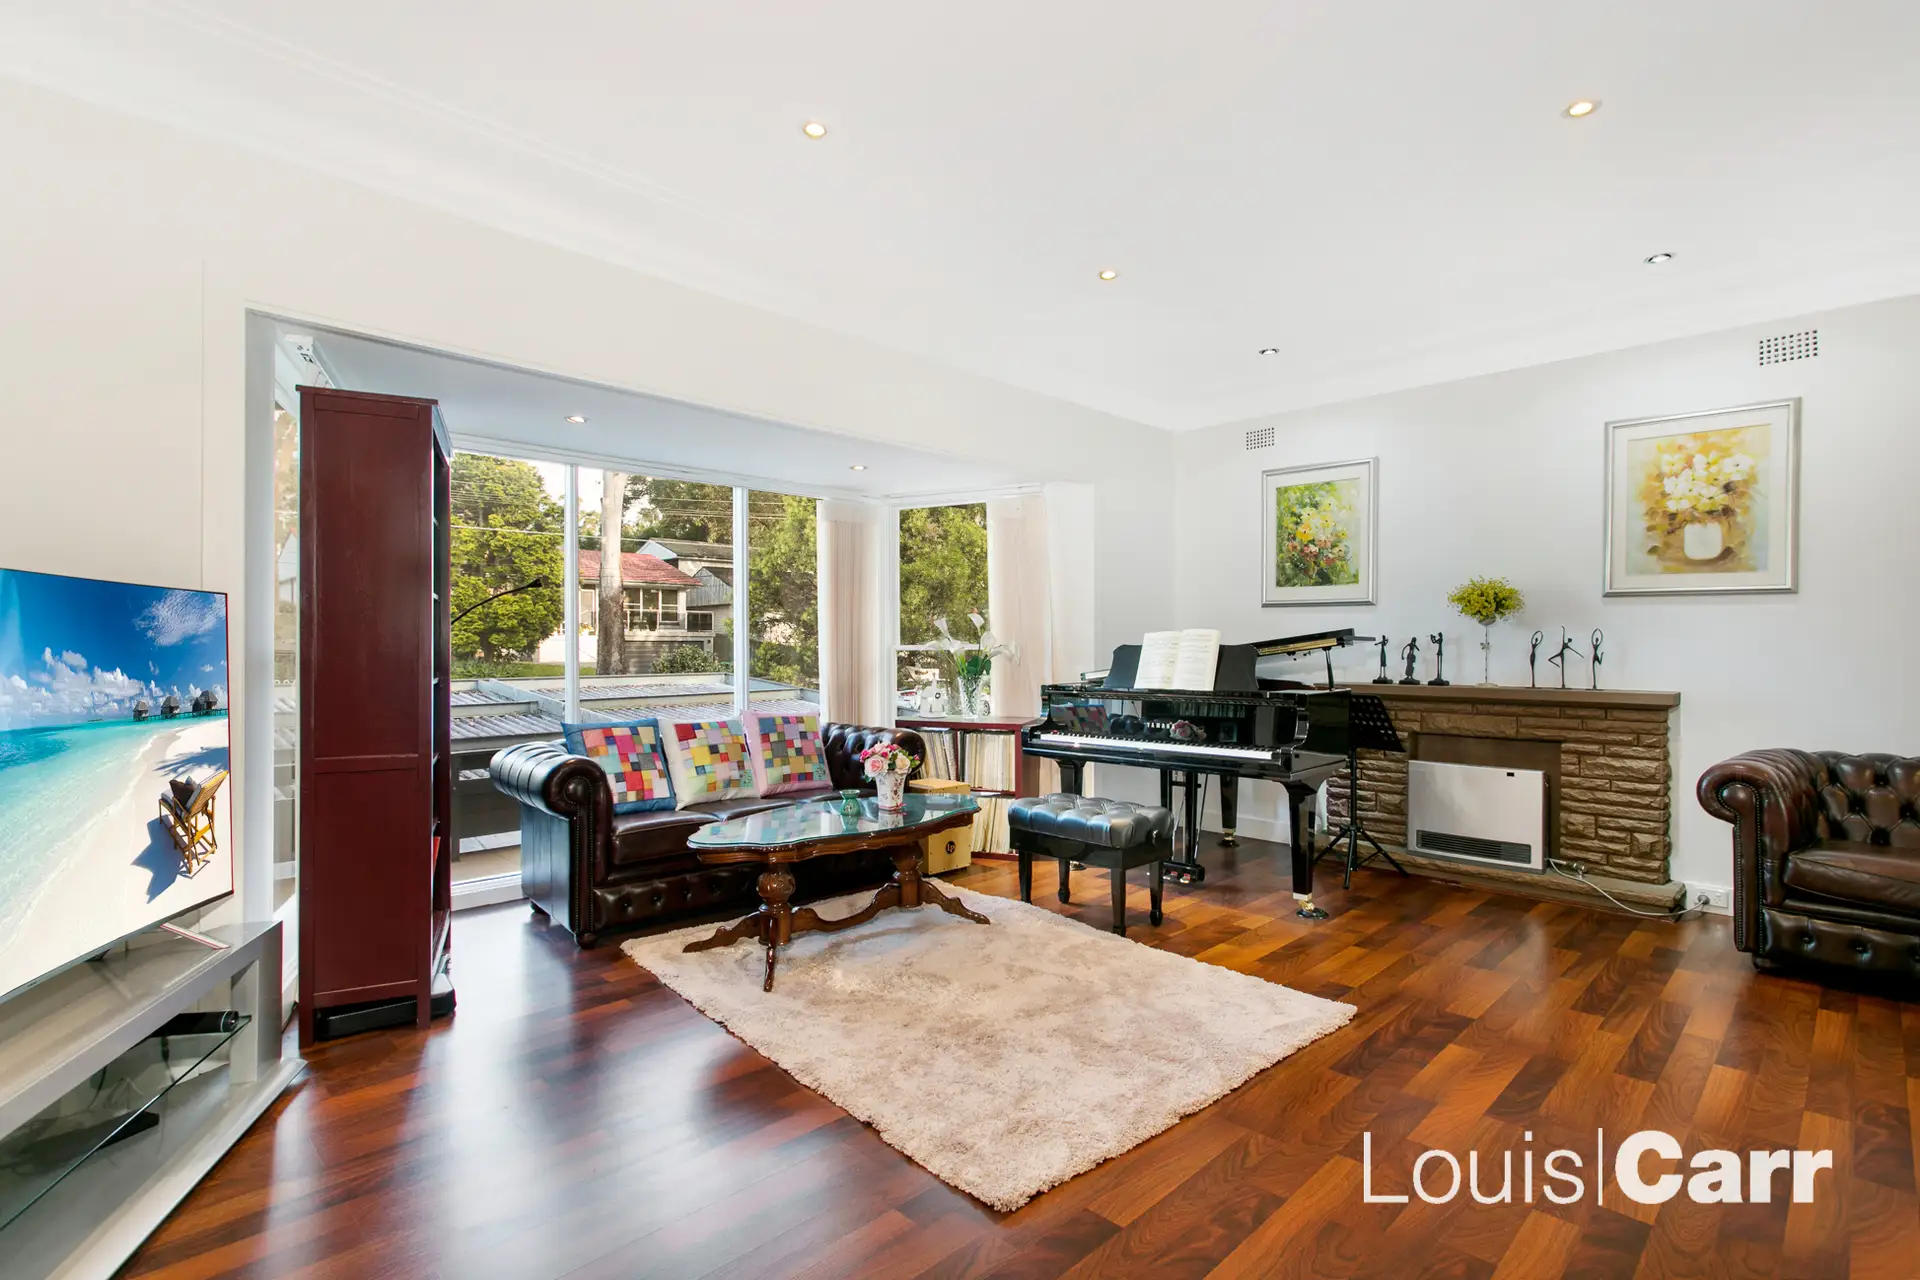 Photo #5: 23 Boyd Avenue, West Pennant Hills - Sold by Louis Carr Real Estate